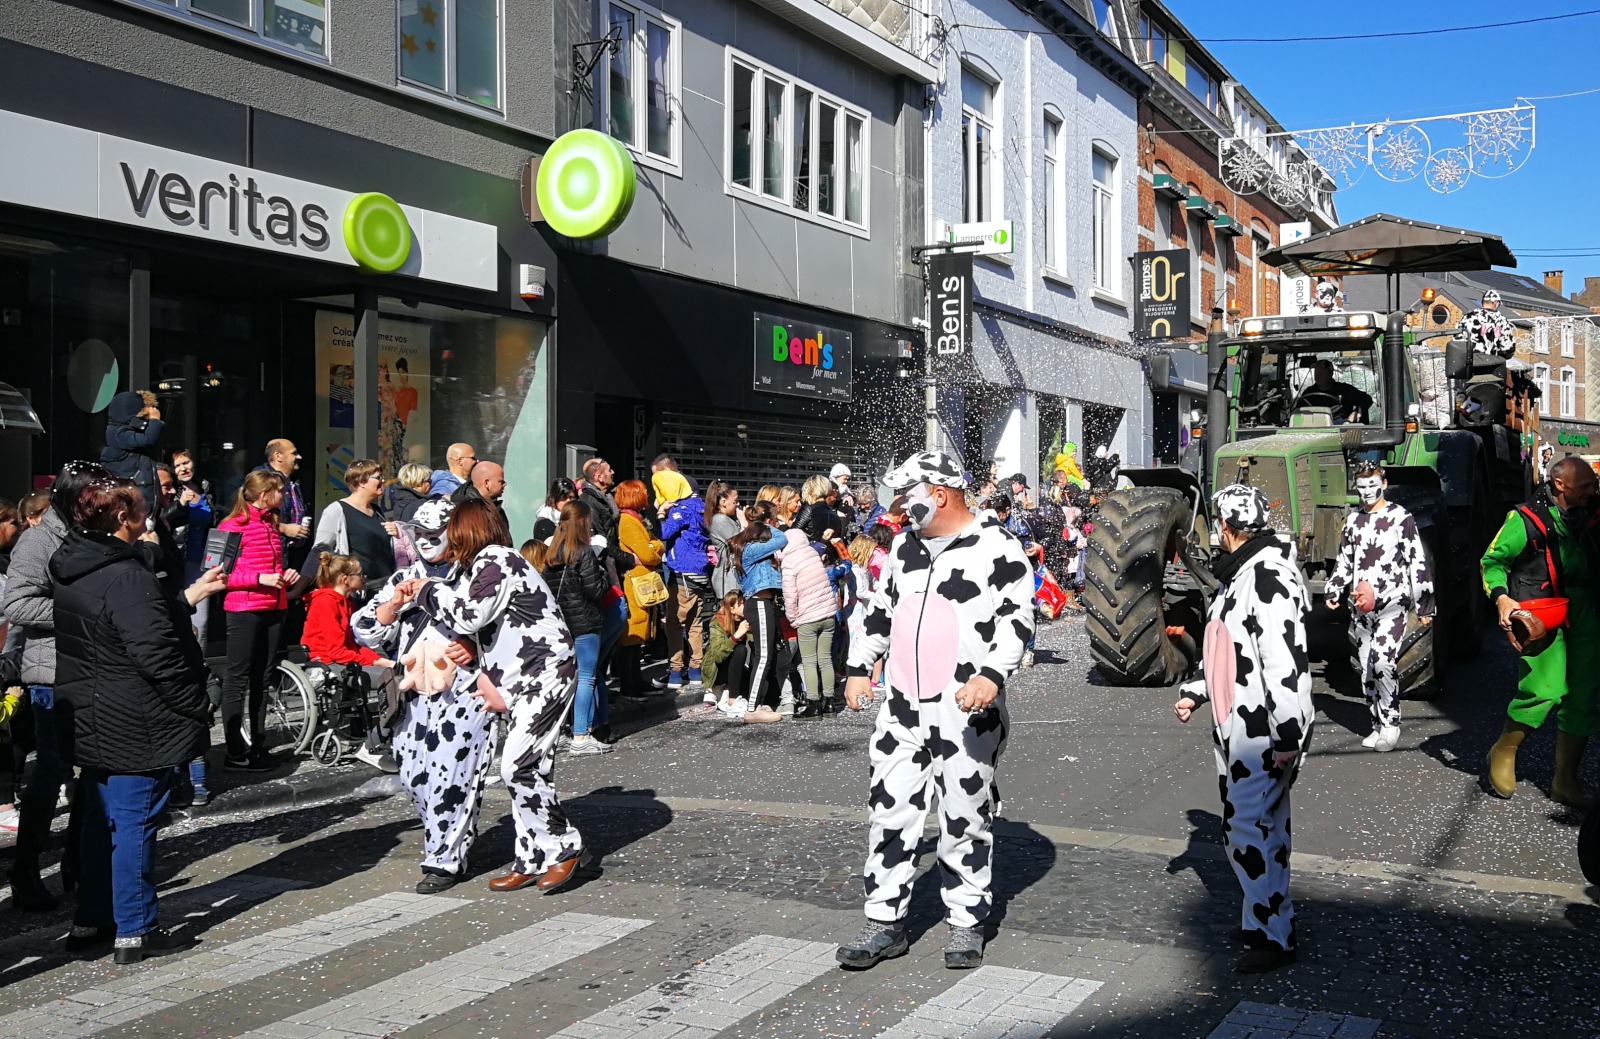 People dressed as cows parading through the village streets